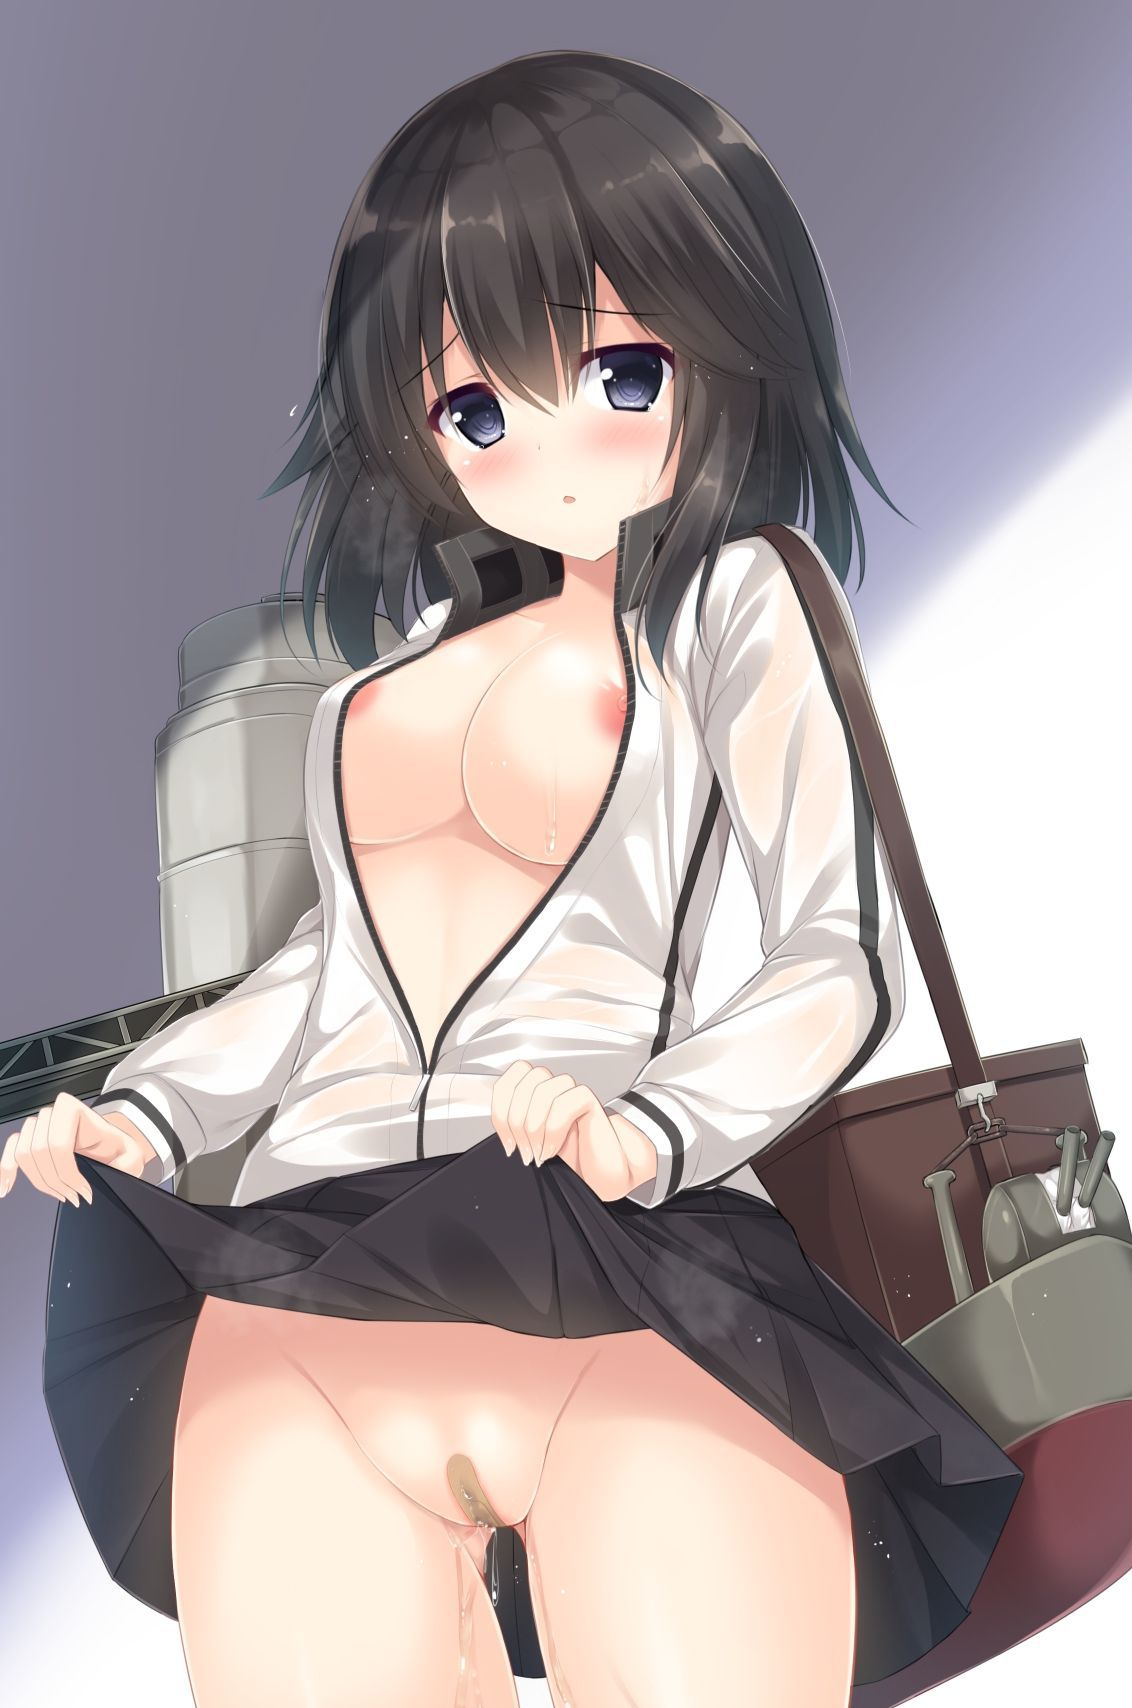 【Secondary erotic】 Here is the erotic image of a girl who raises clothes inviting to etch 3